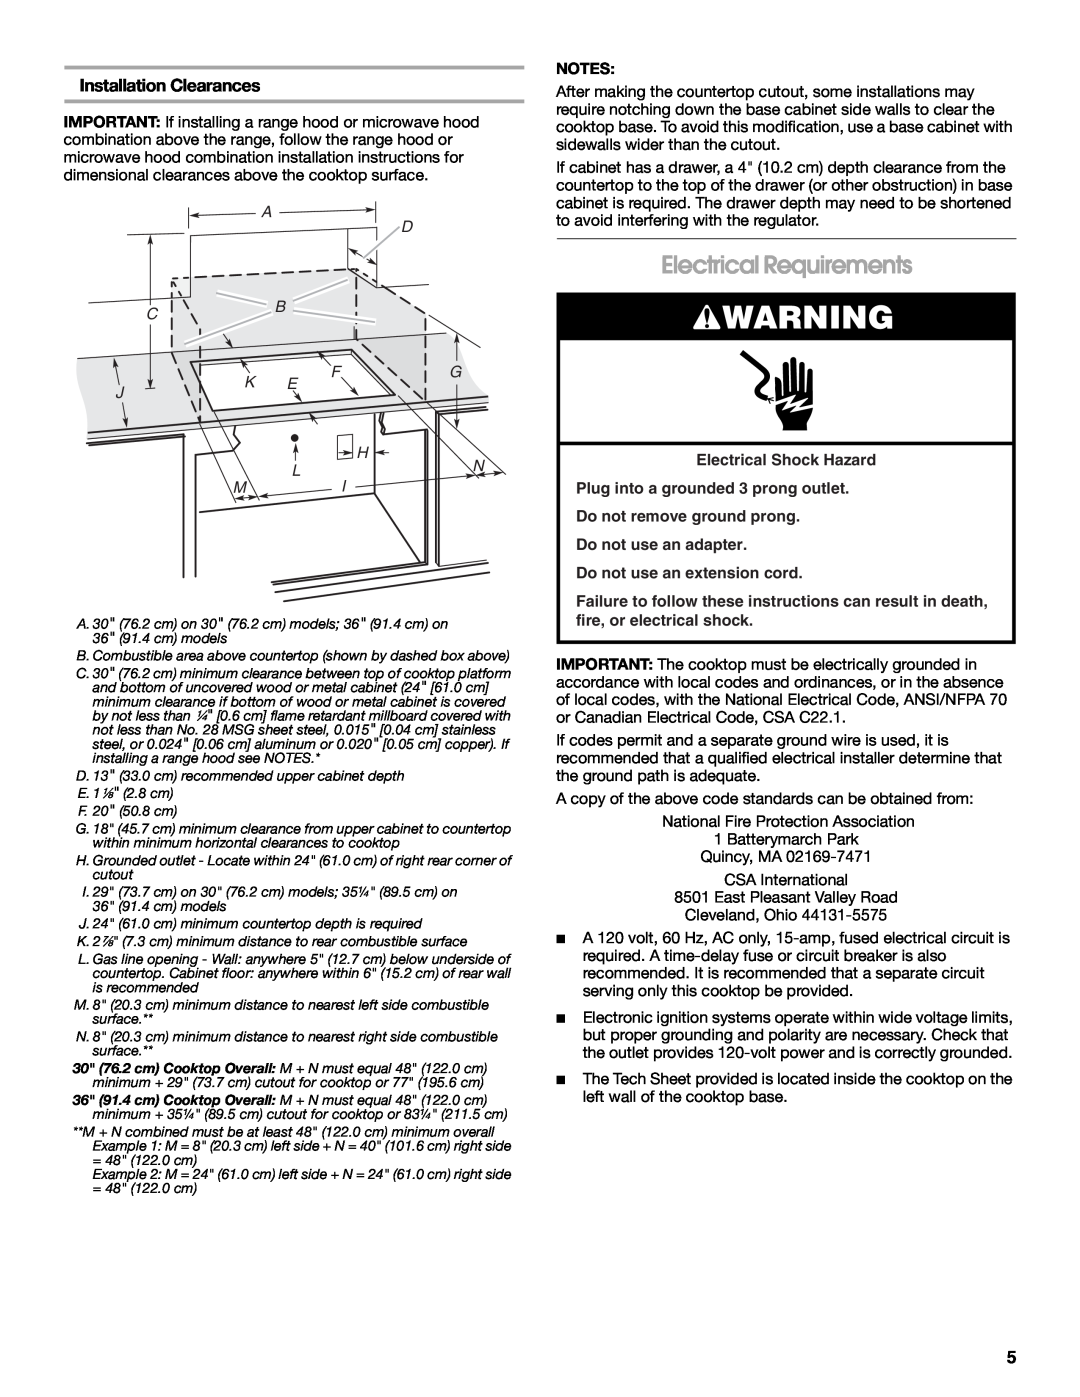 Whirlpool W10526085A installation instructions Electrical Requirements, Installation Clearances, A D C B, Fg H, Ln Mi 